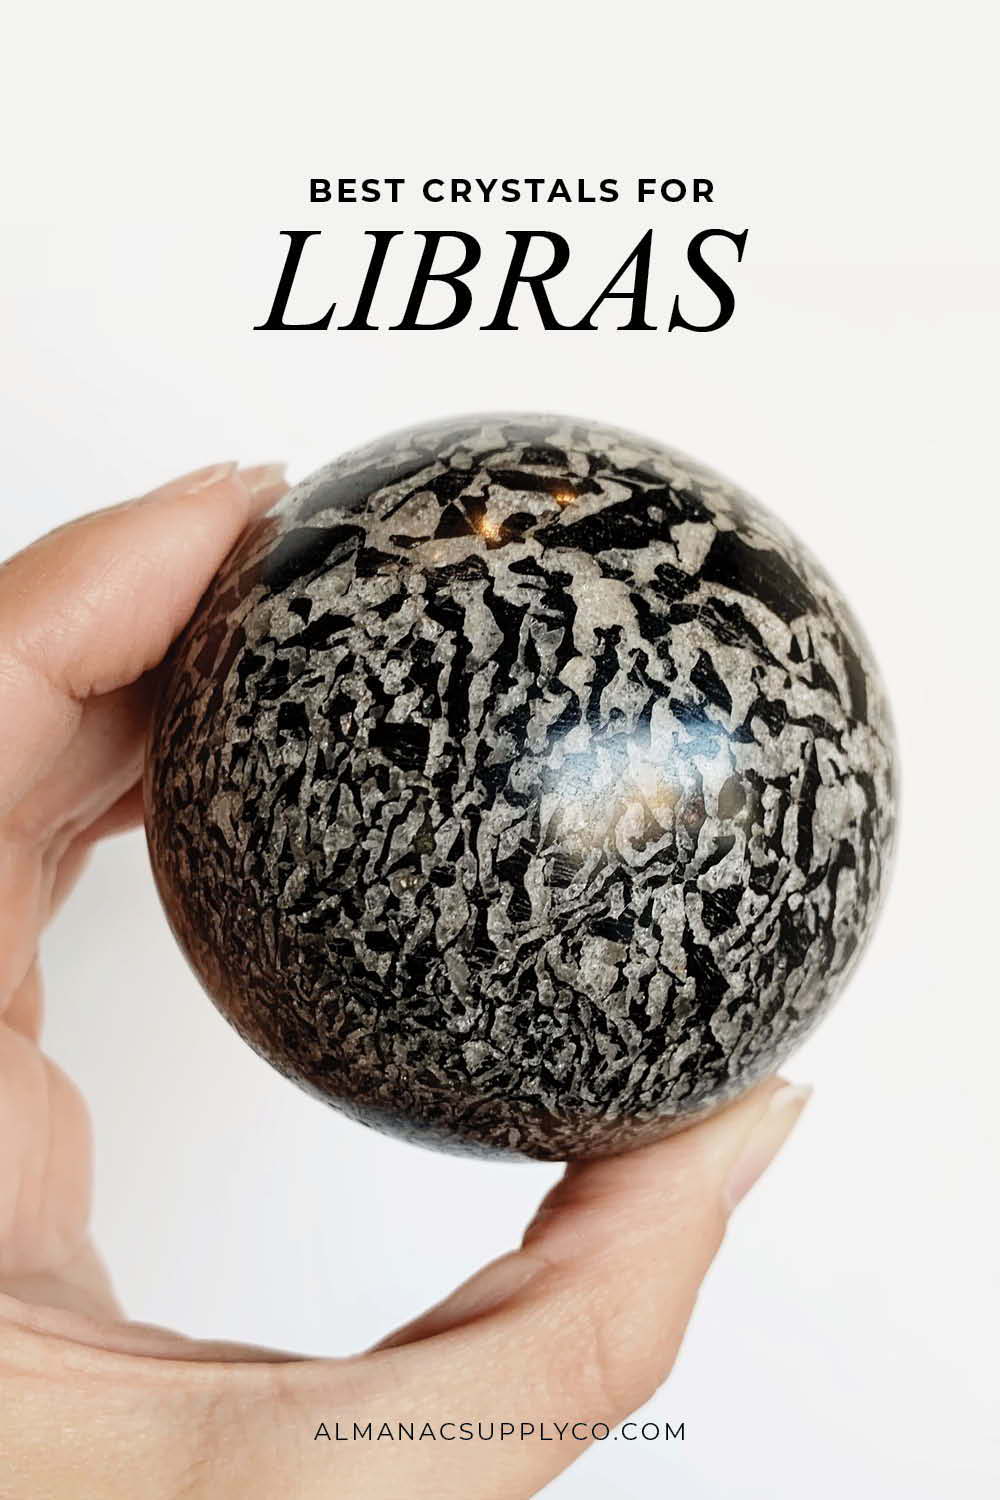 The Best Crystals for Libra